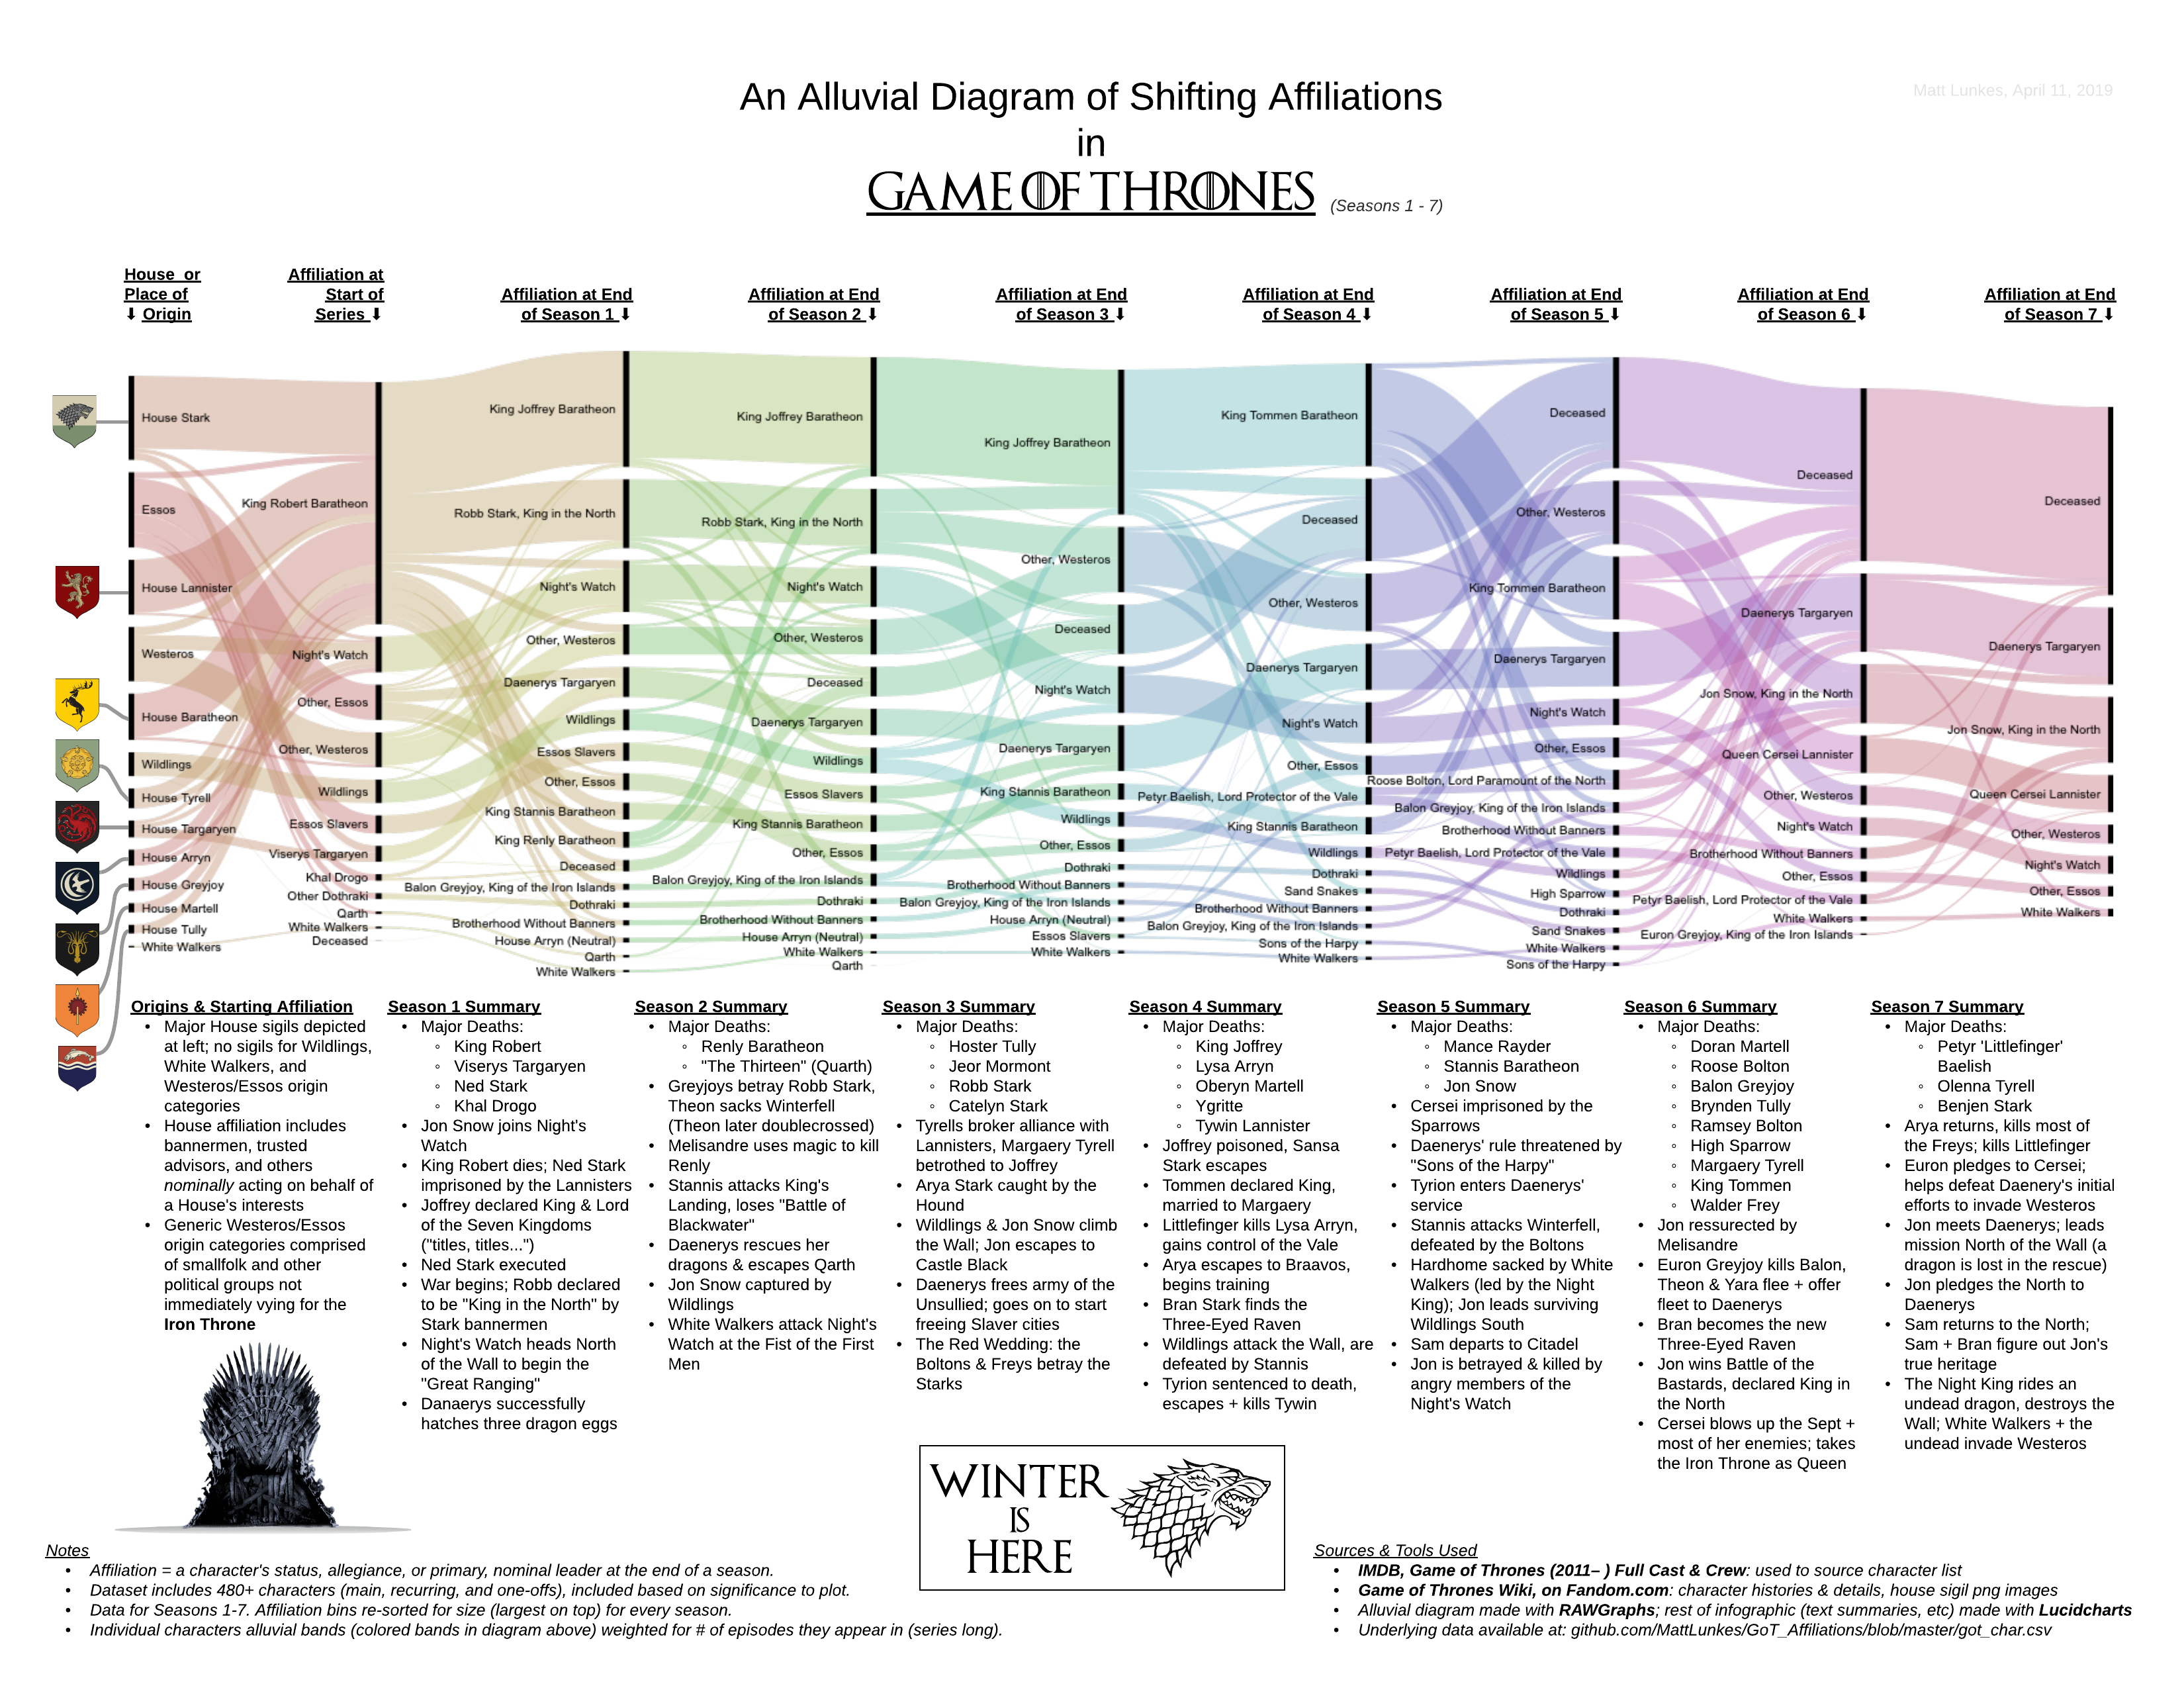 Game Of Thrones Diagram A Game Of Data Visualizations Making Alluvial Diagrams Without Code